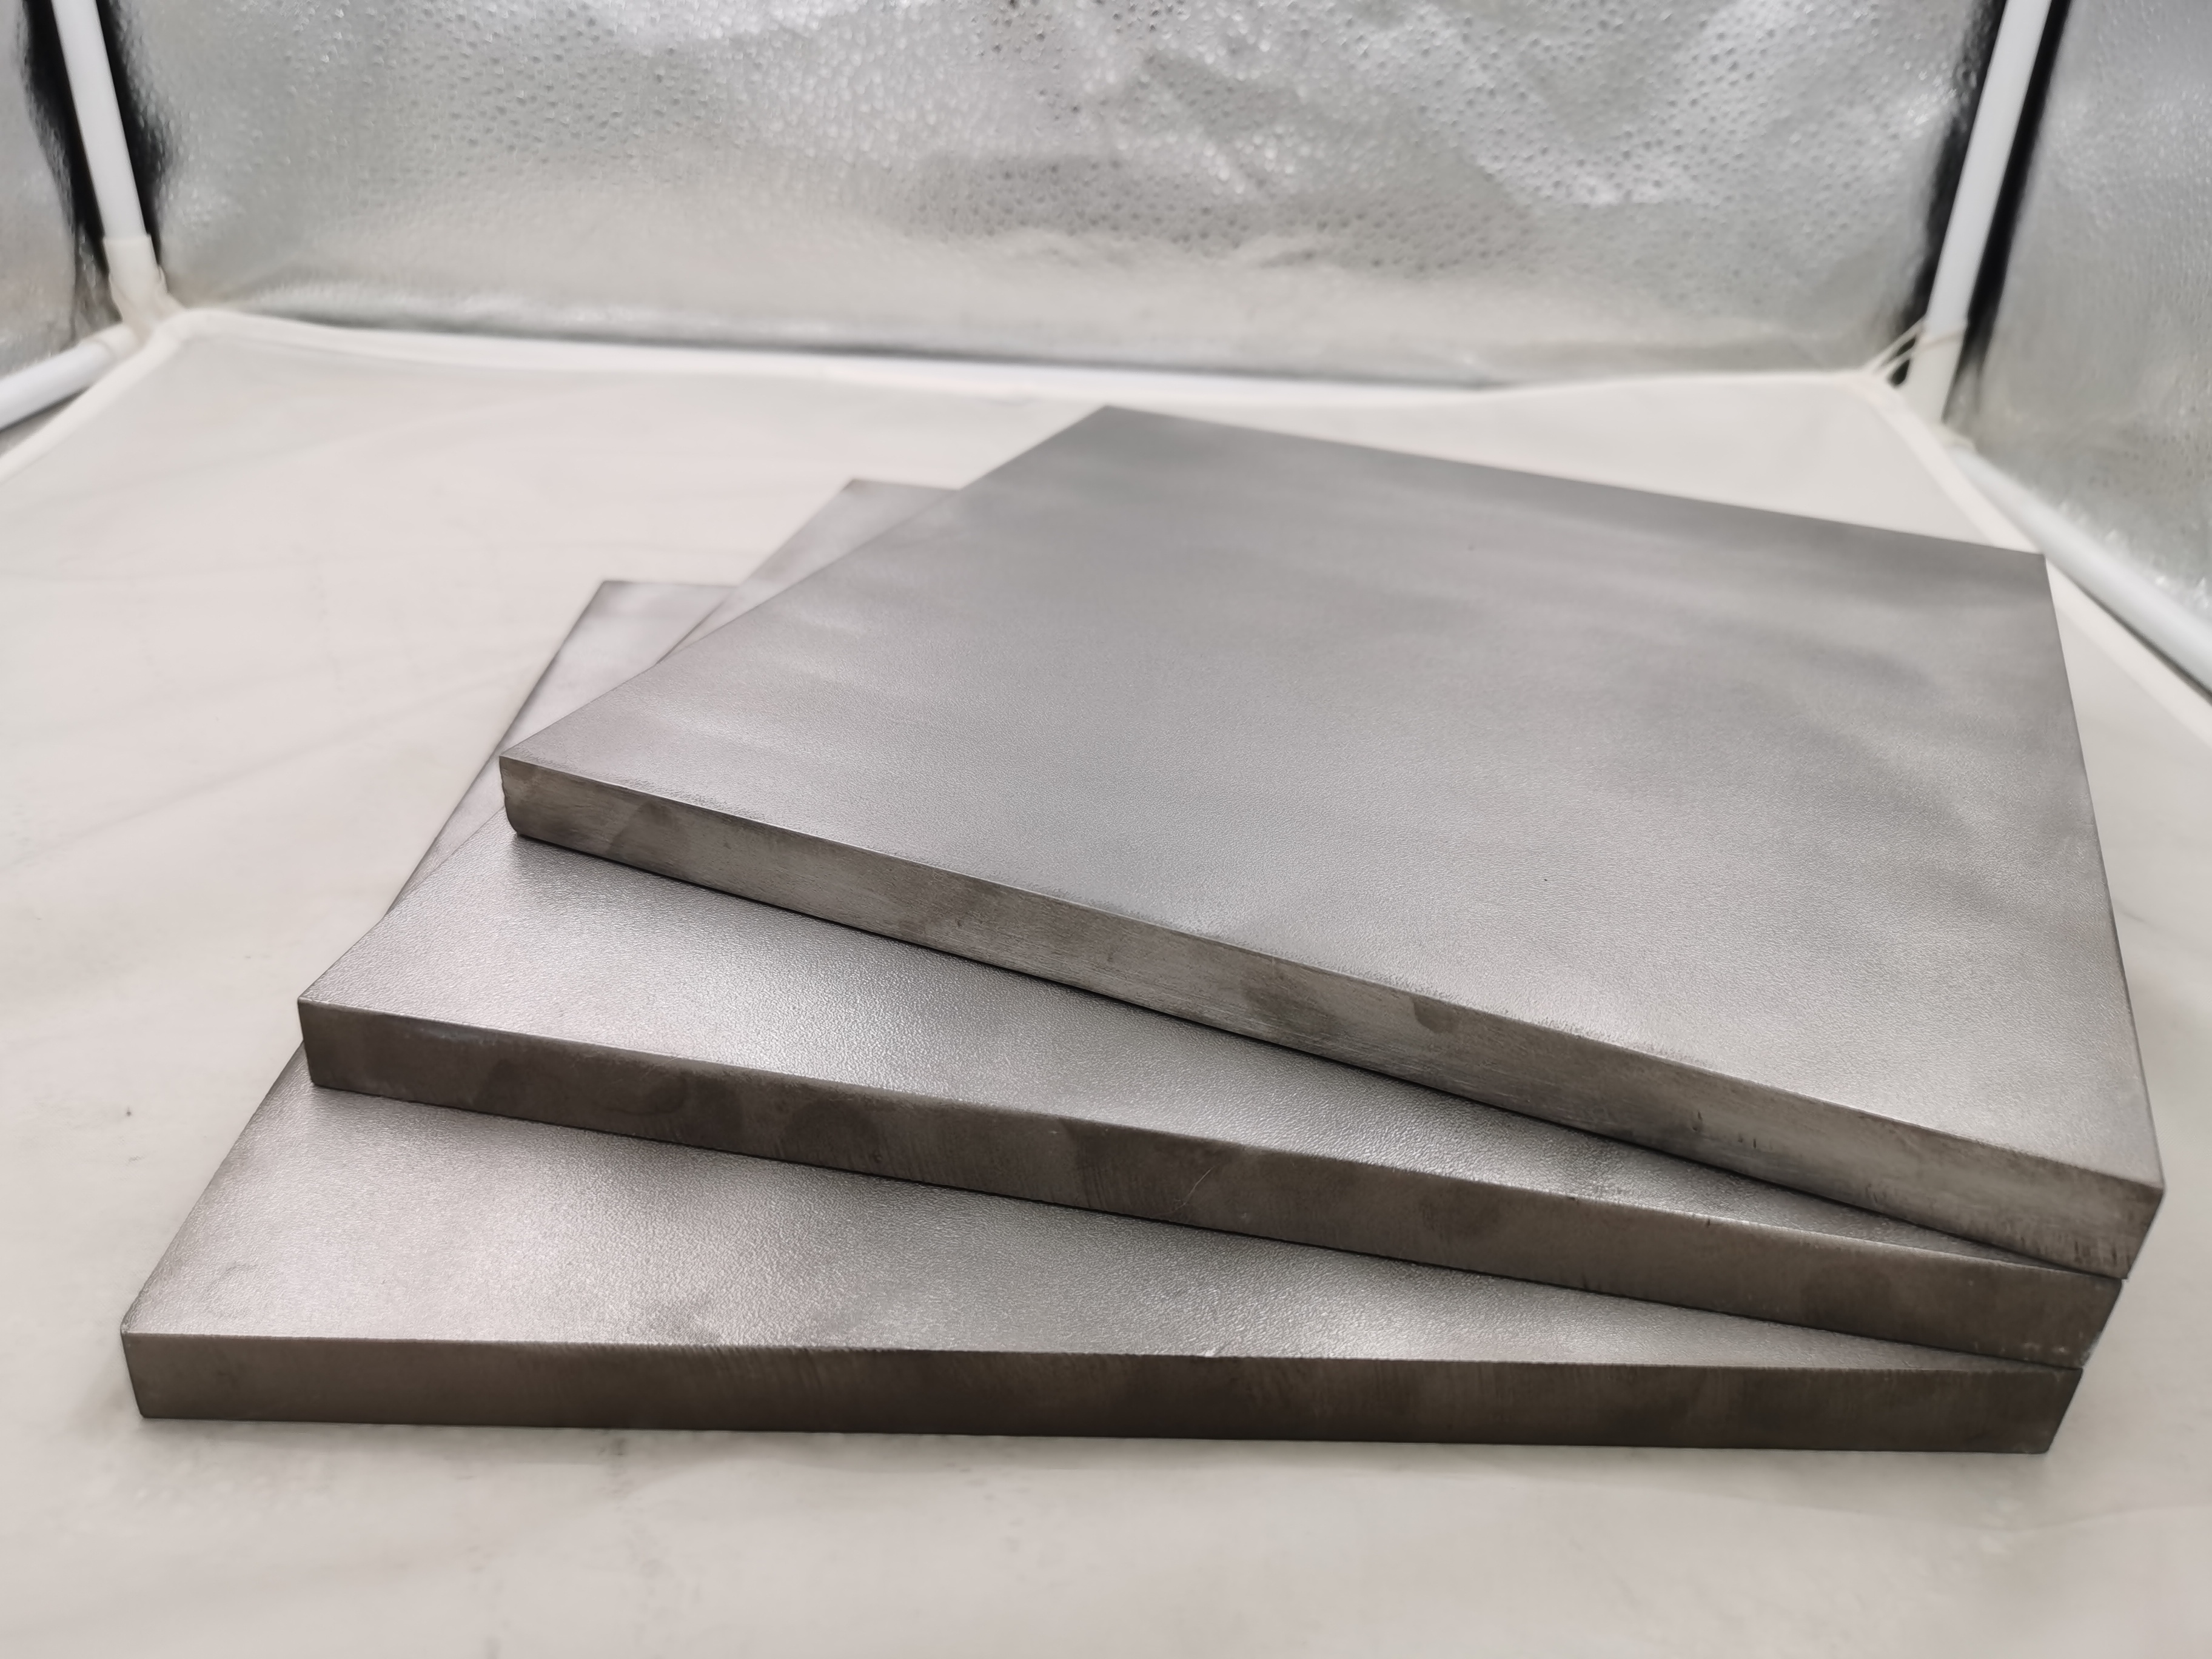 2pcs Gr5 5*40*1000mm and 1pc Gr5 8*50*1000mm Titanium Alloy Plate Ti Sheet For DIY OEM Metalworking Supplies